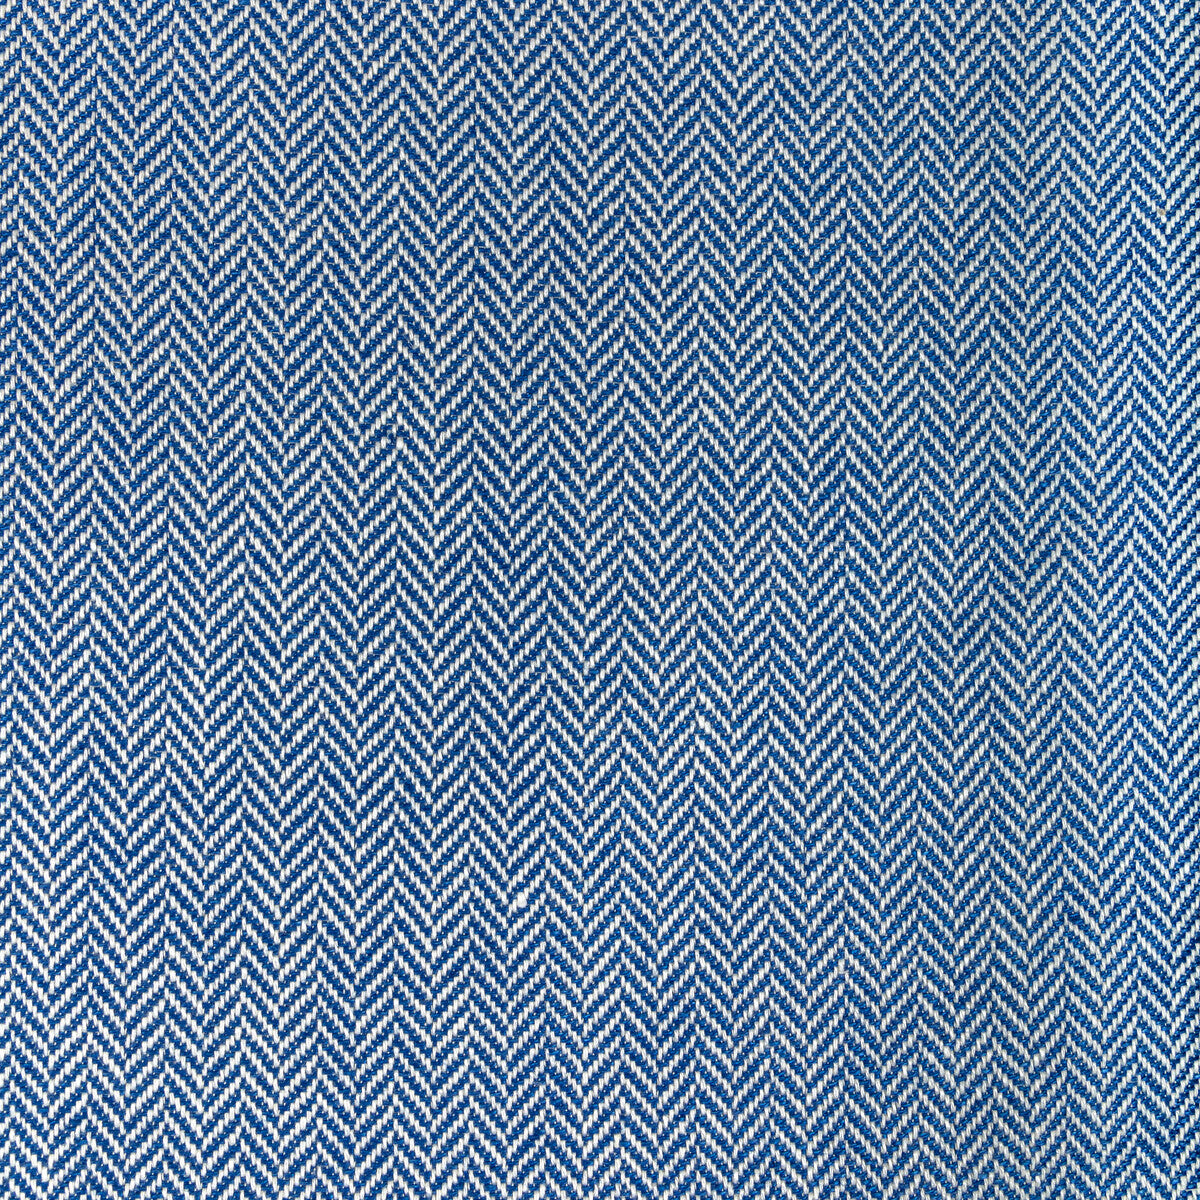 Kerolay Linen Weave fabric in blue color - pattern 8022107.5.0 - by Brunschwig &amp; Fils in the Lorient Weaves collection